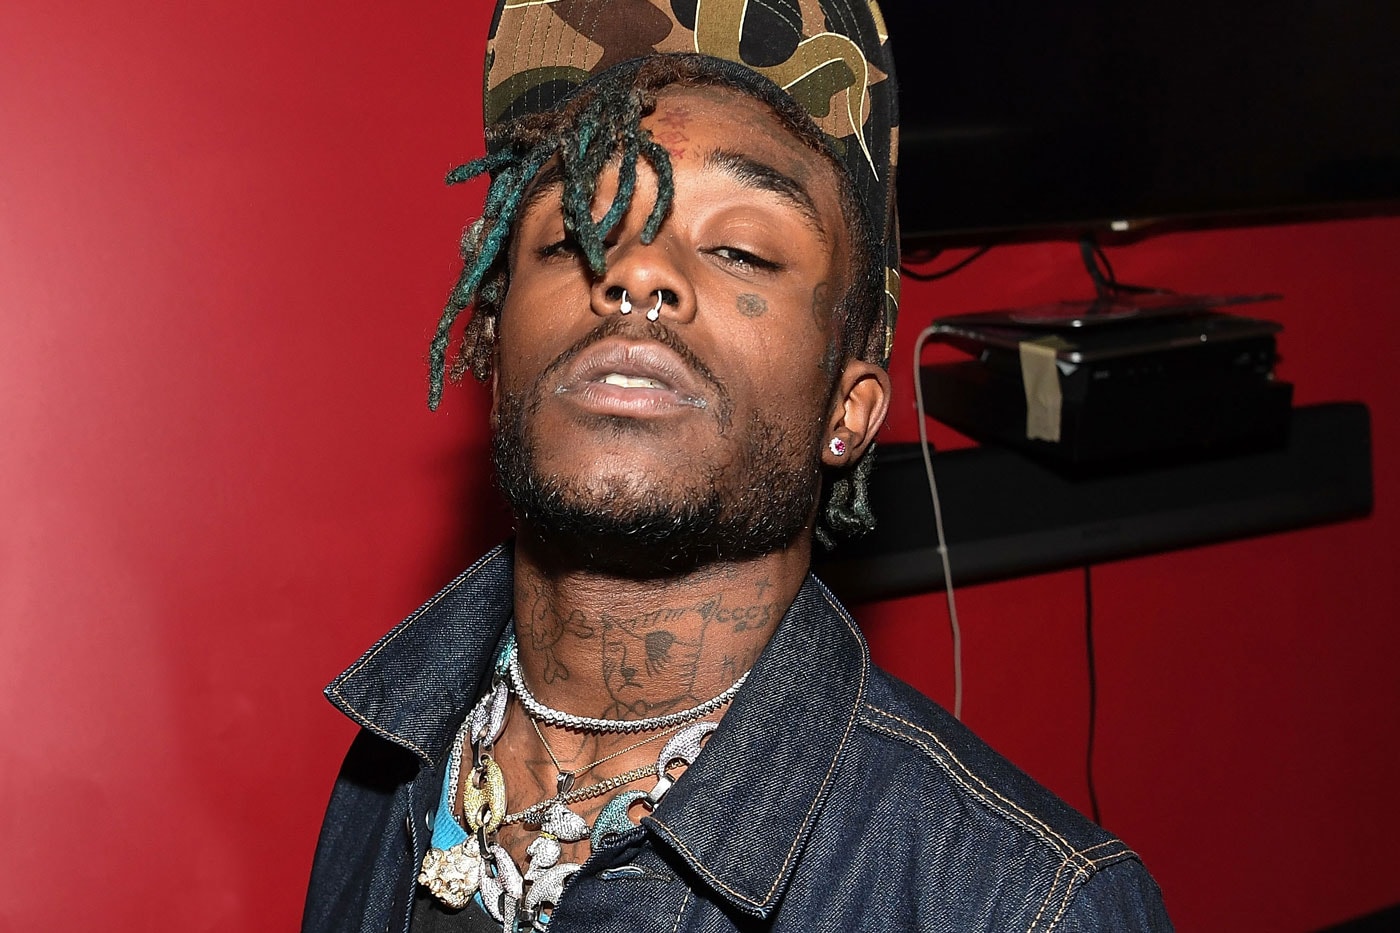 Lil Uzi Vert Gets Chased by Mob of Fans Again